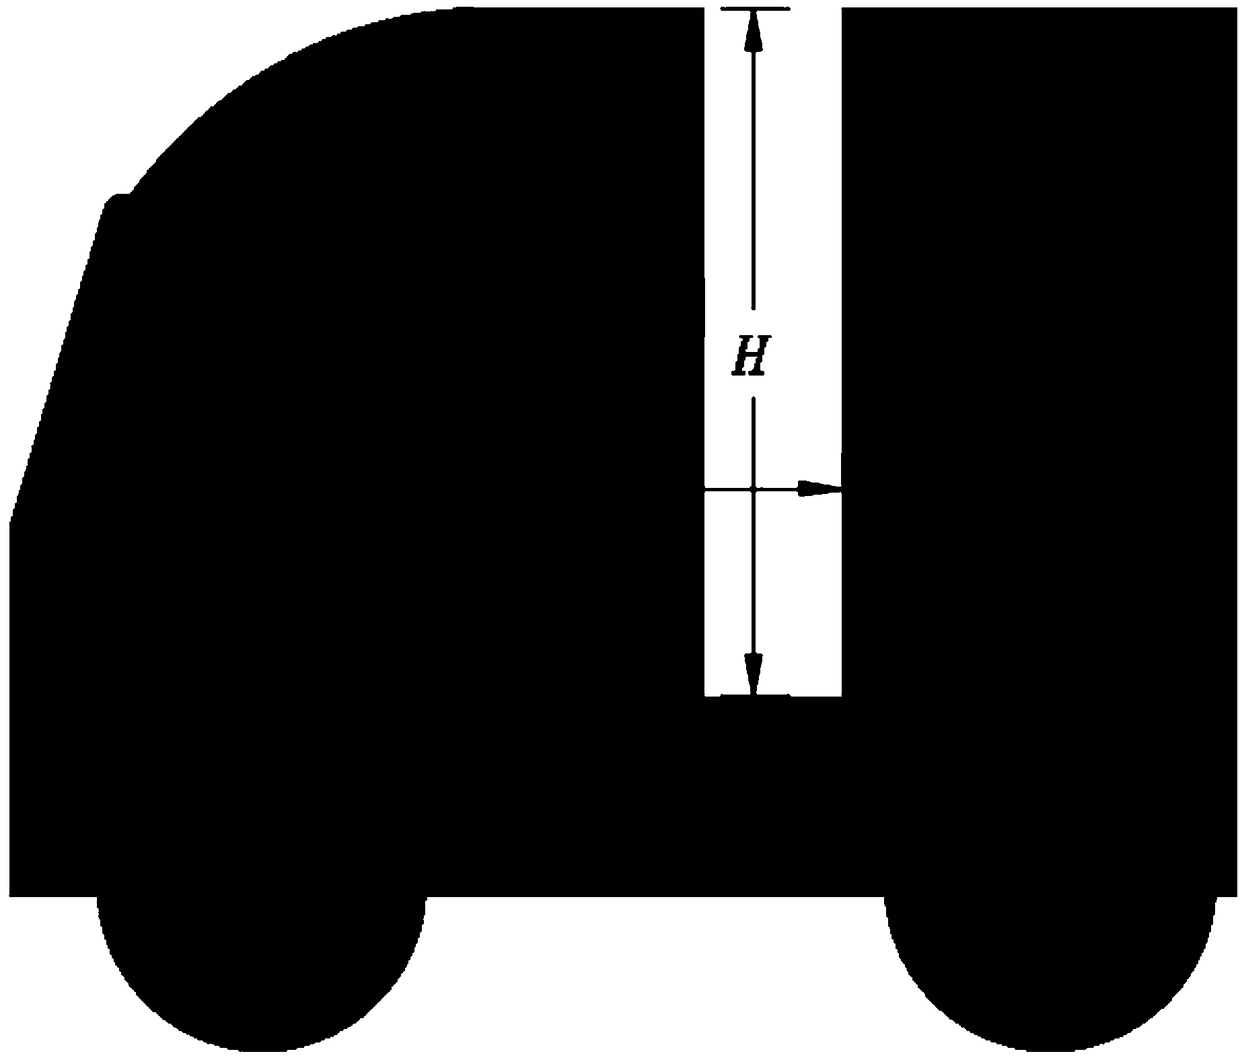 A drag reduction device for vans